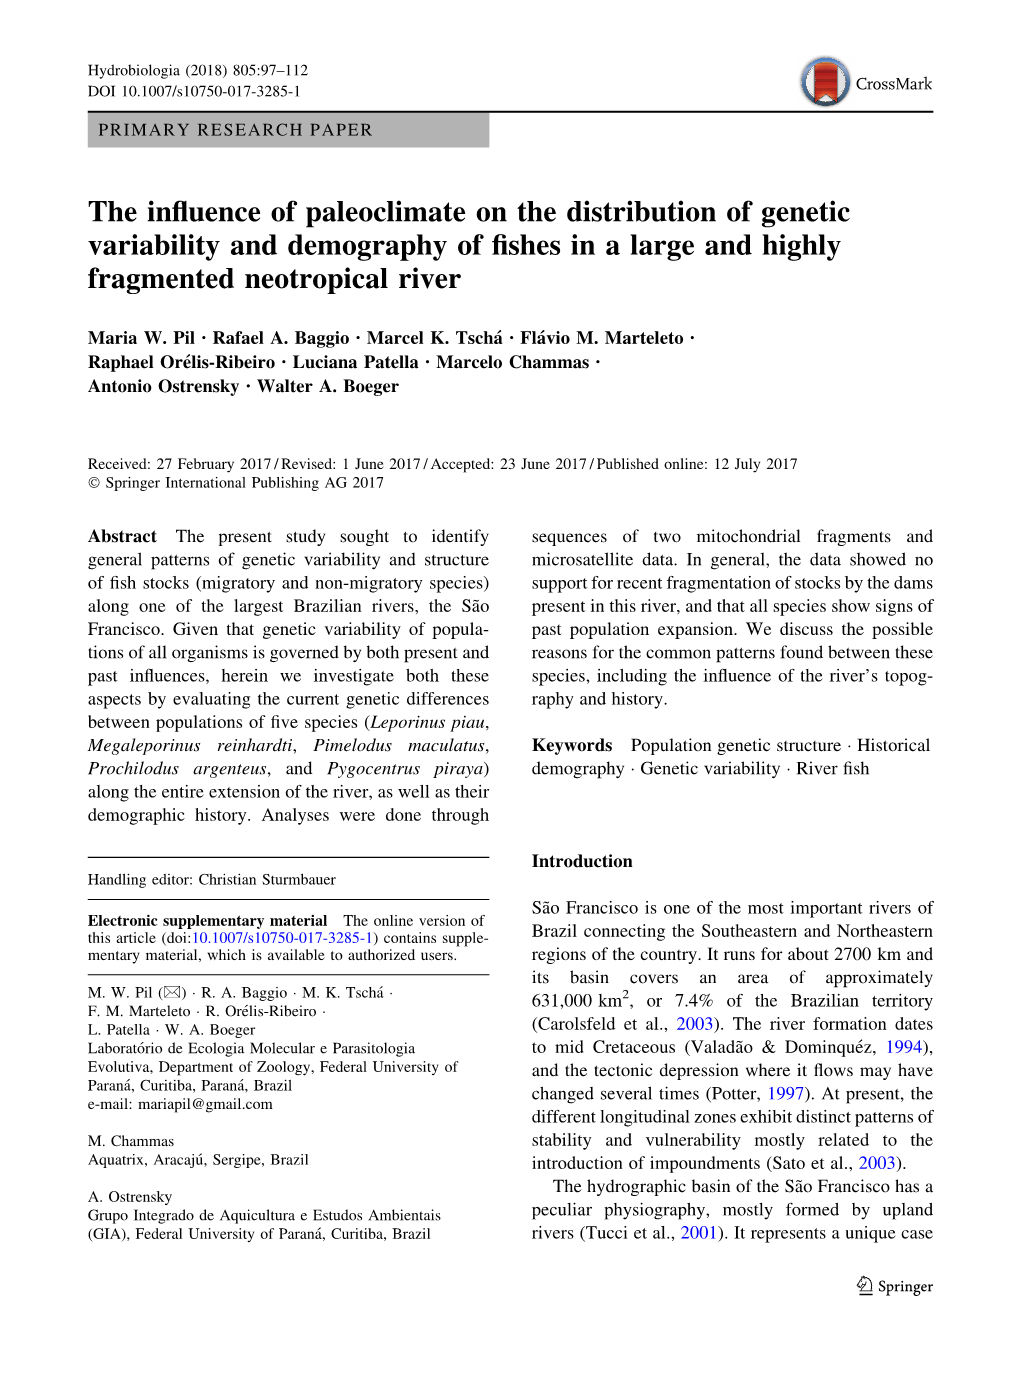 The Influence of Paleoclimate on the Distribution of Genetic Variability And